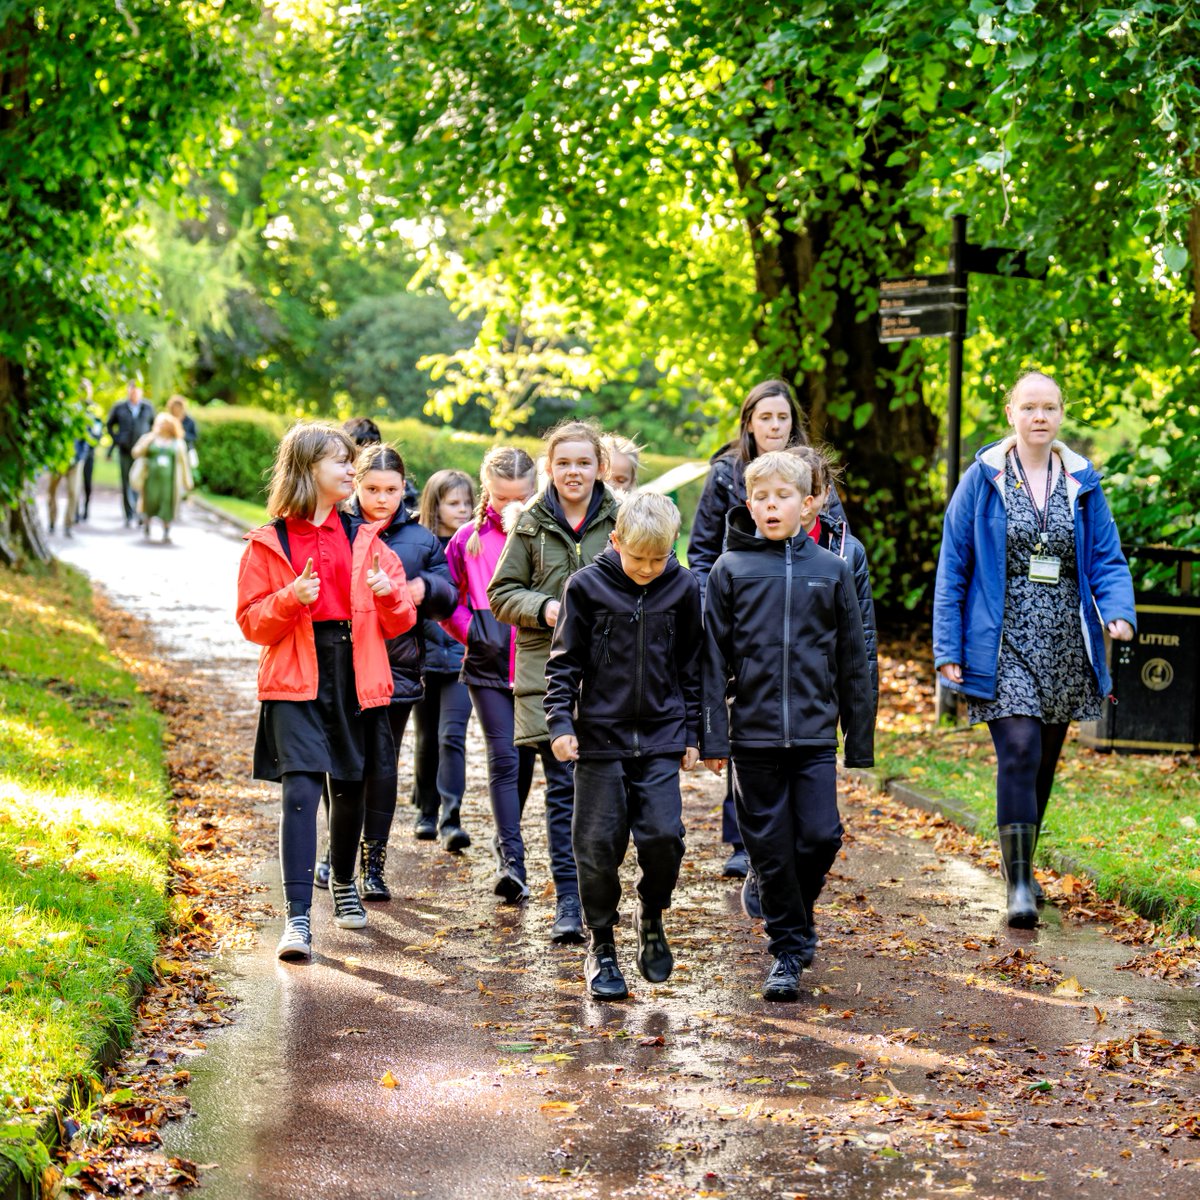 Ramblers Wellbeing Walks: Strolls are free, short, and friendly🌳. They take place all across England, including Chelmsford & SWF. Discover your local walk - bit.ly/49xjPFx